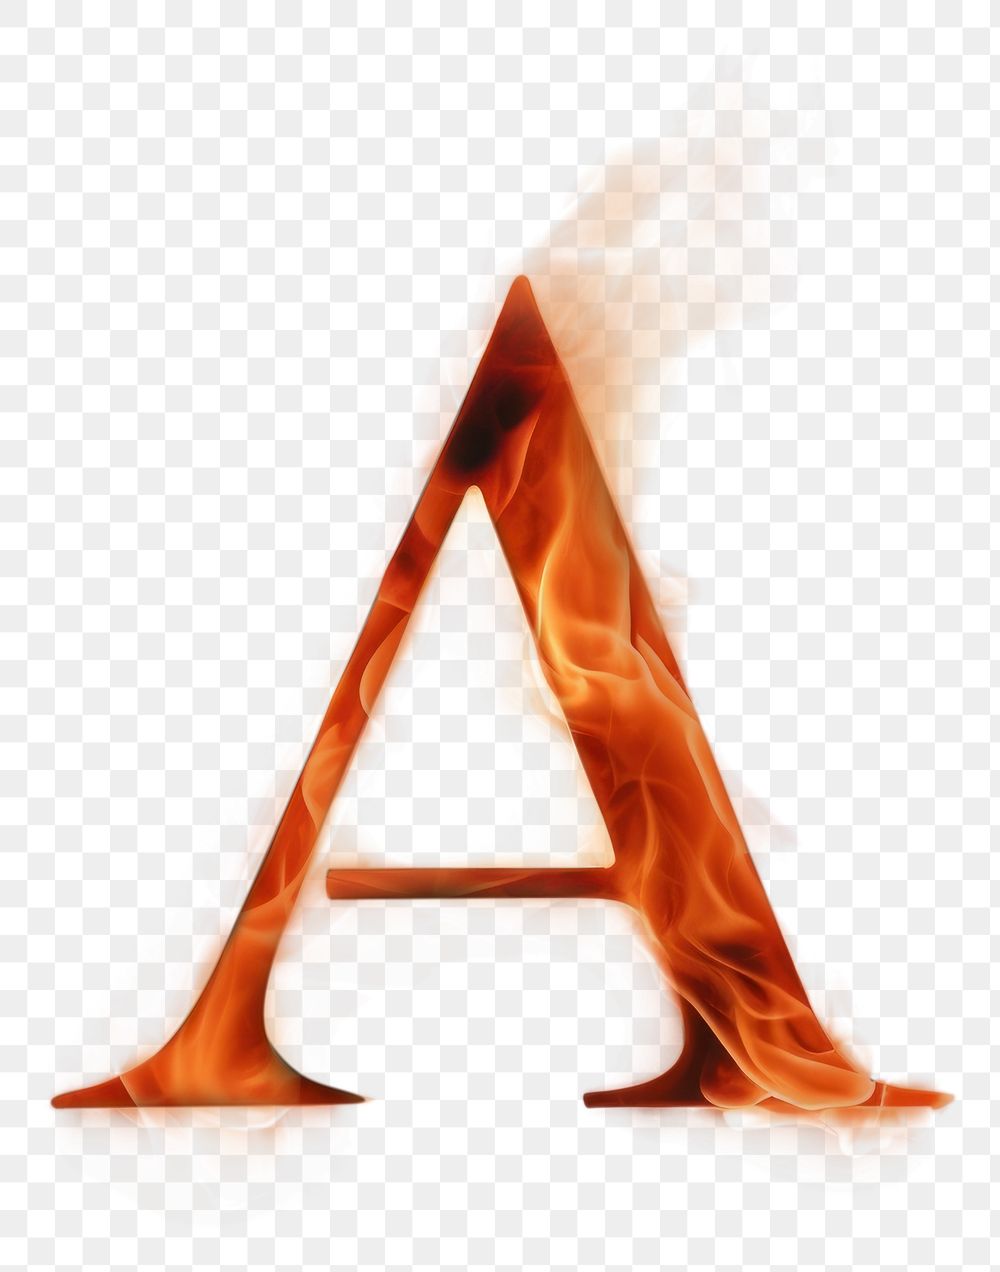 Burning letter A fire triangle glowing.